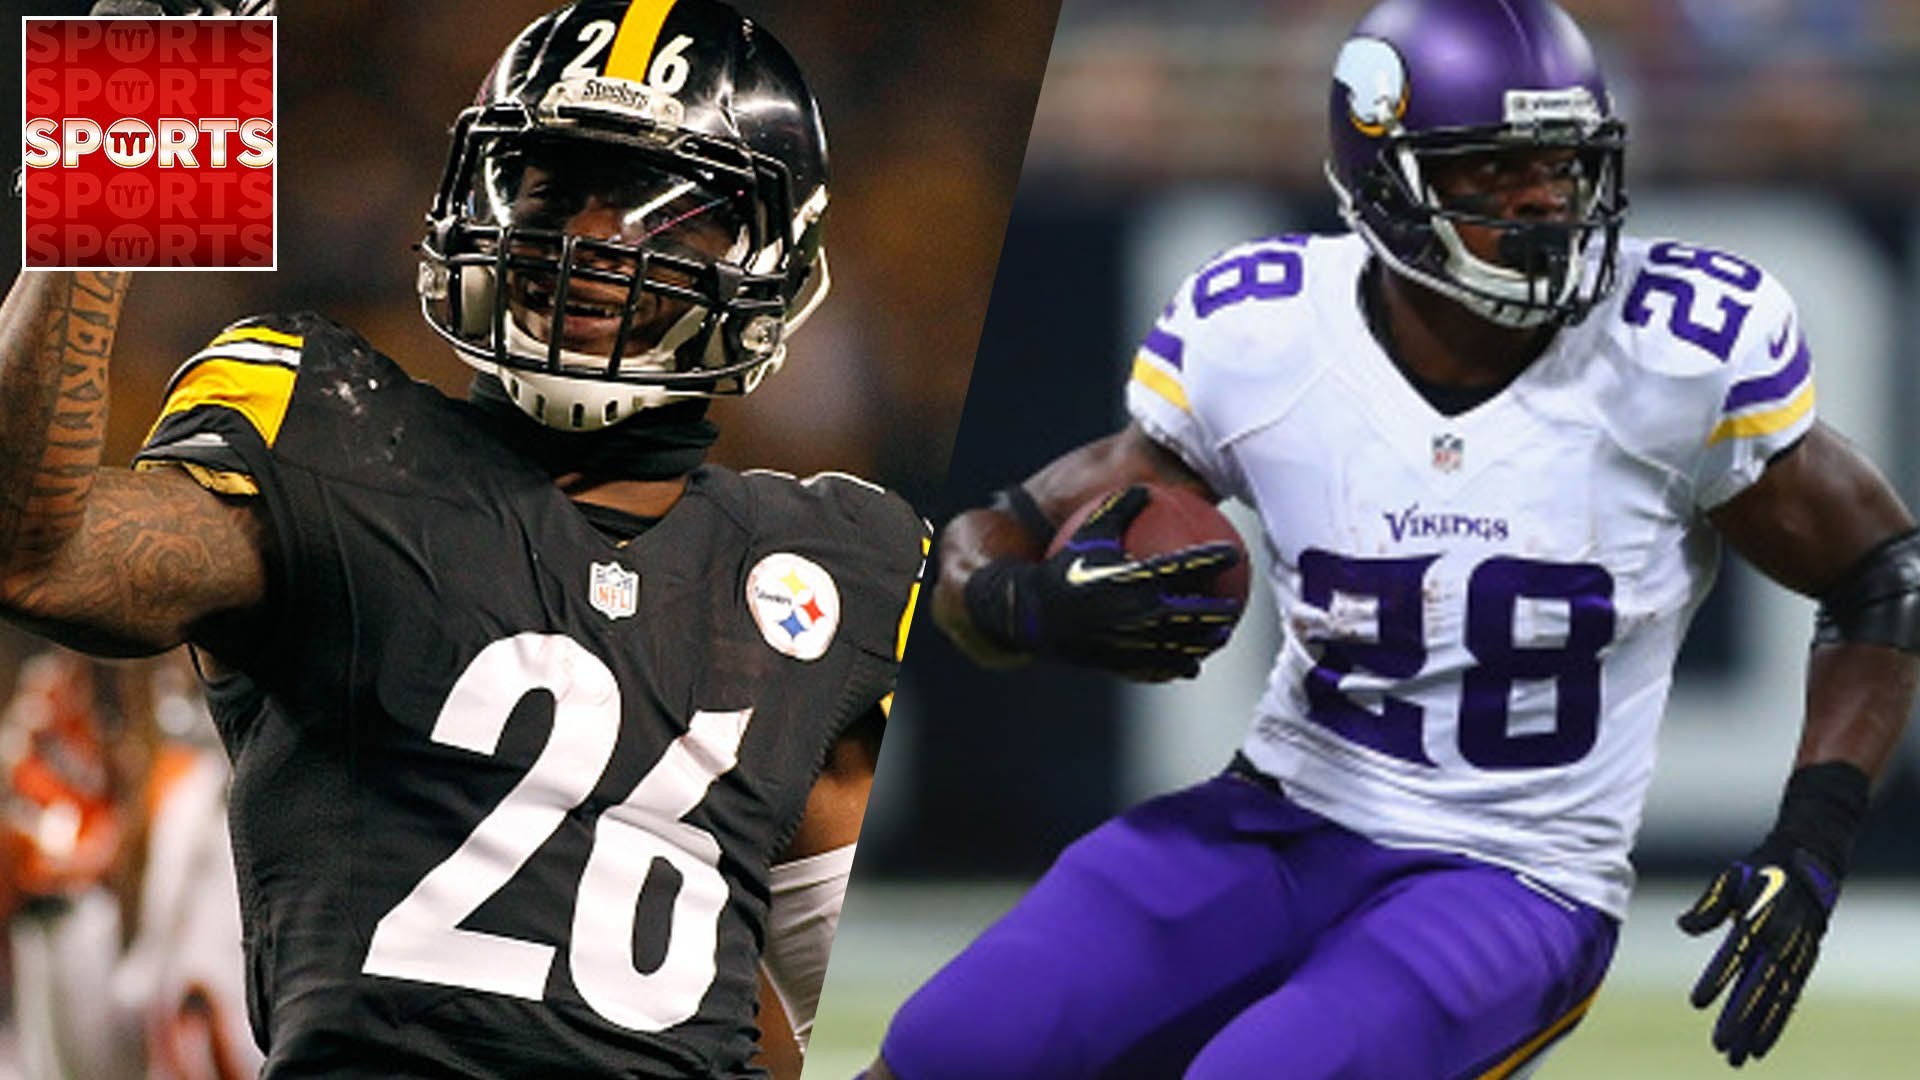 1920x1080 Who Is FANTASY FOOTBALL'S #1 Overall Pick? [Le'Veon Bell? Adrian Peterson?]